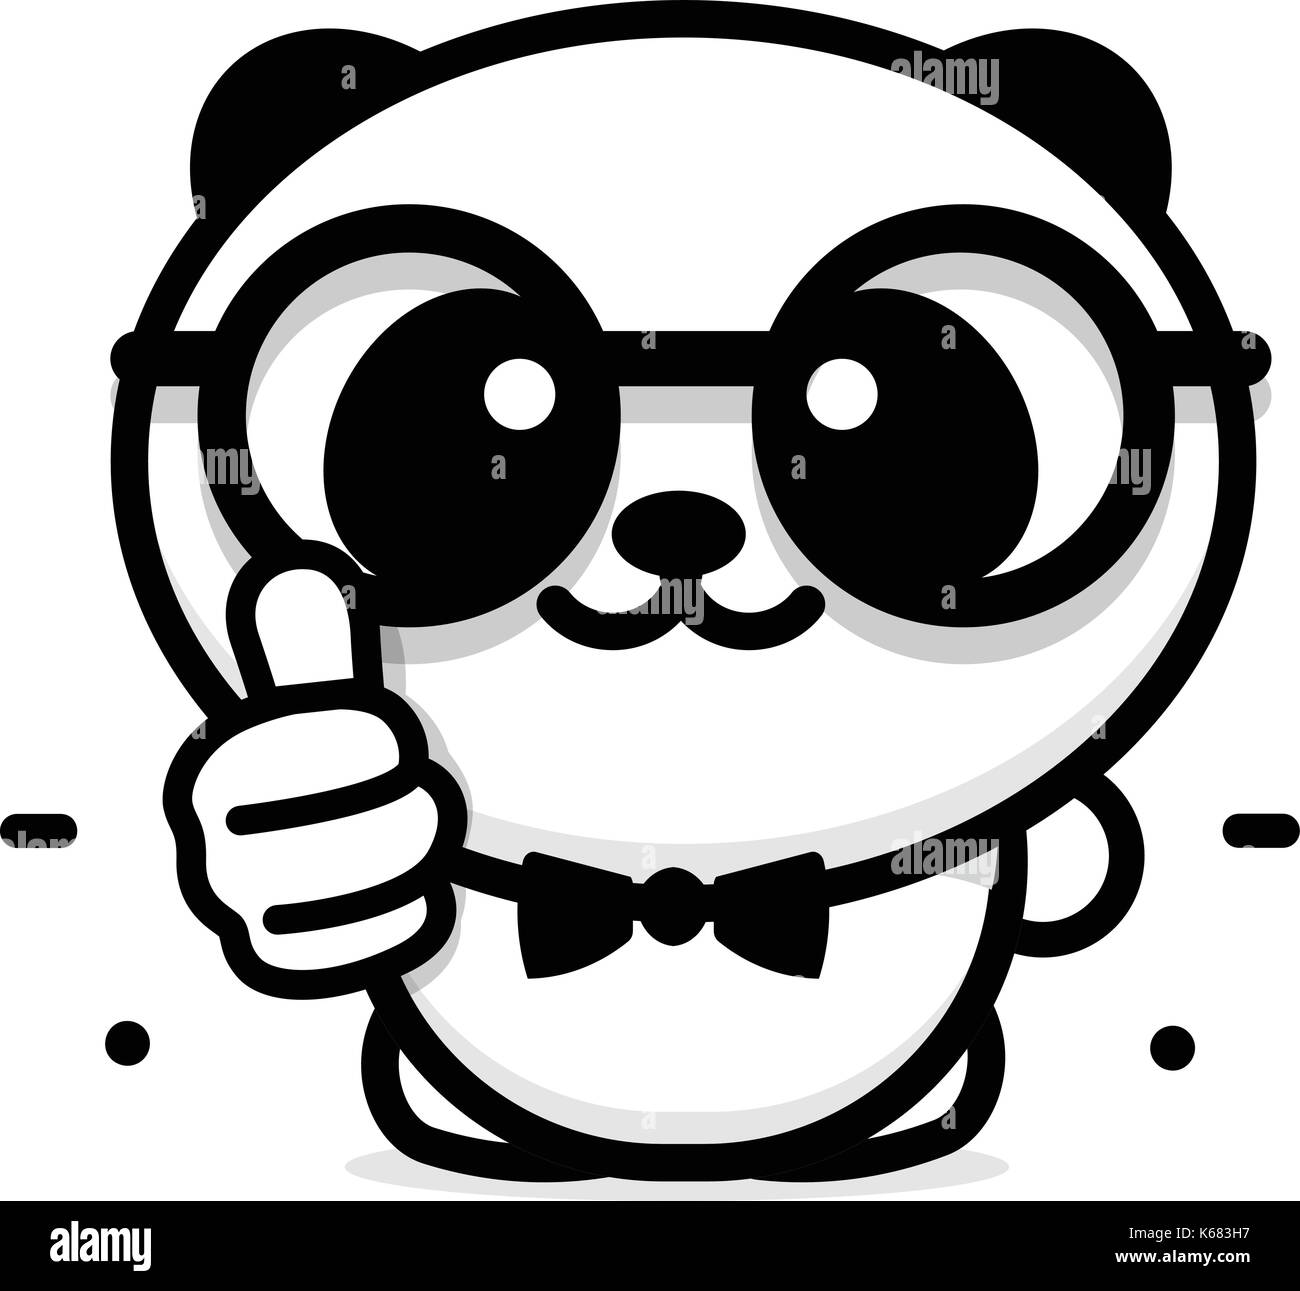 OK logo. Funny little cute panda showing gesture with hand, abstract symbol of approval and adoption. Vector thumbs up logo with the image of a Chinese black and white bear showing its consent Stock Vector